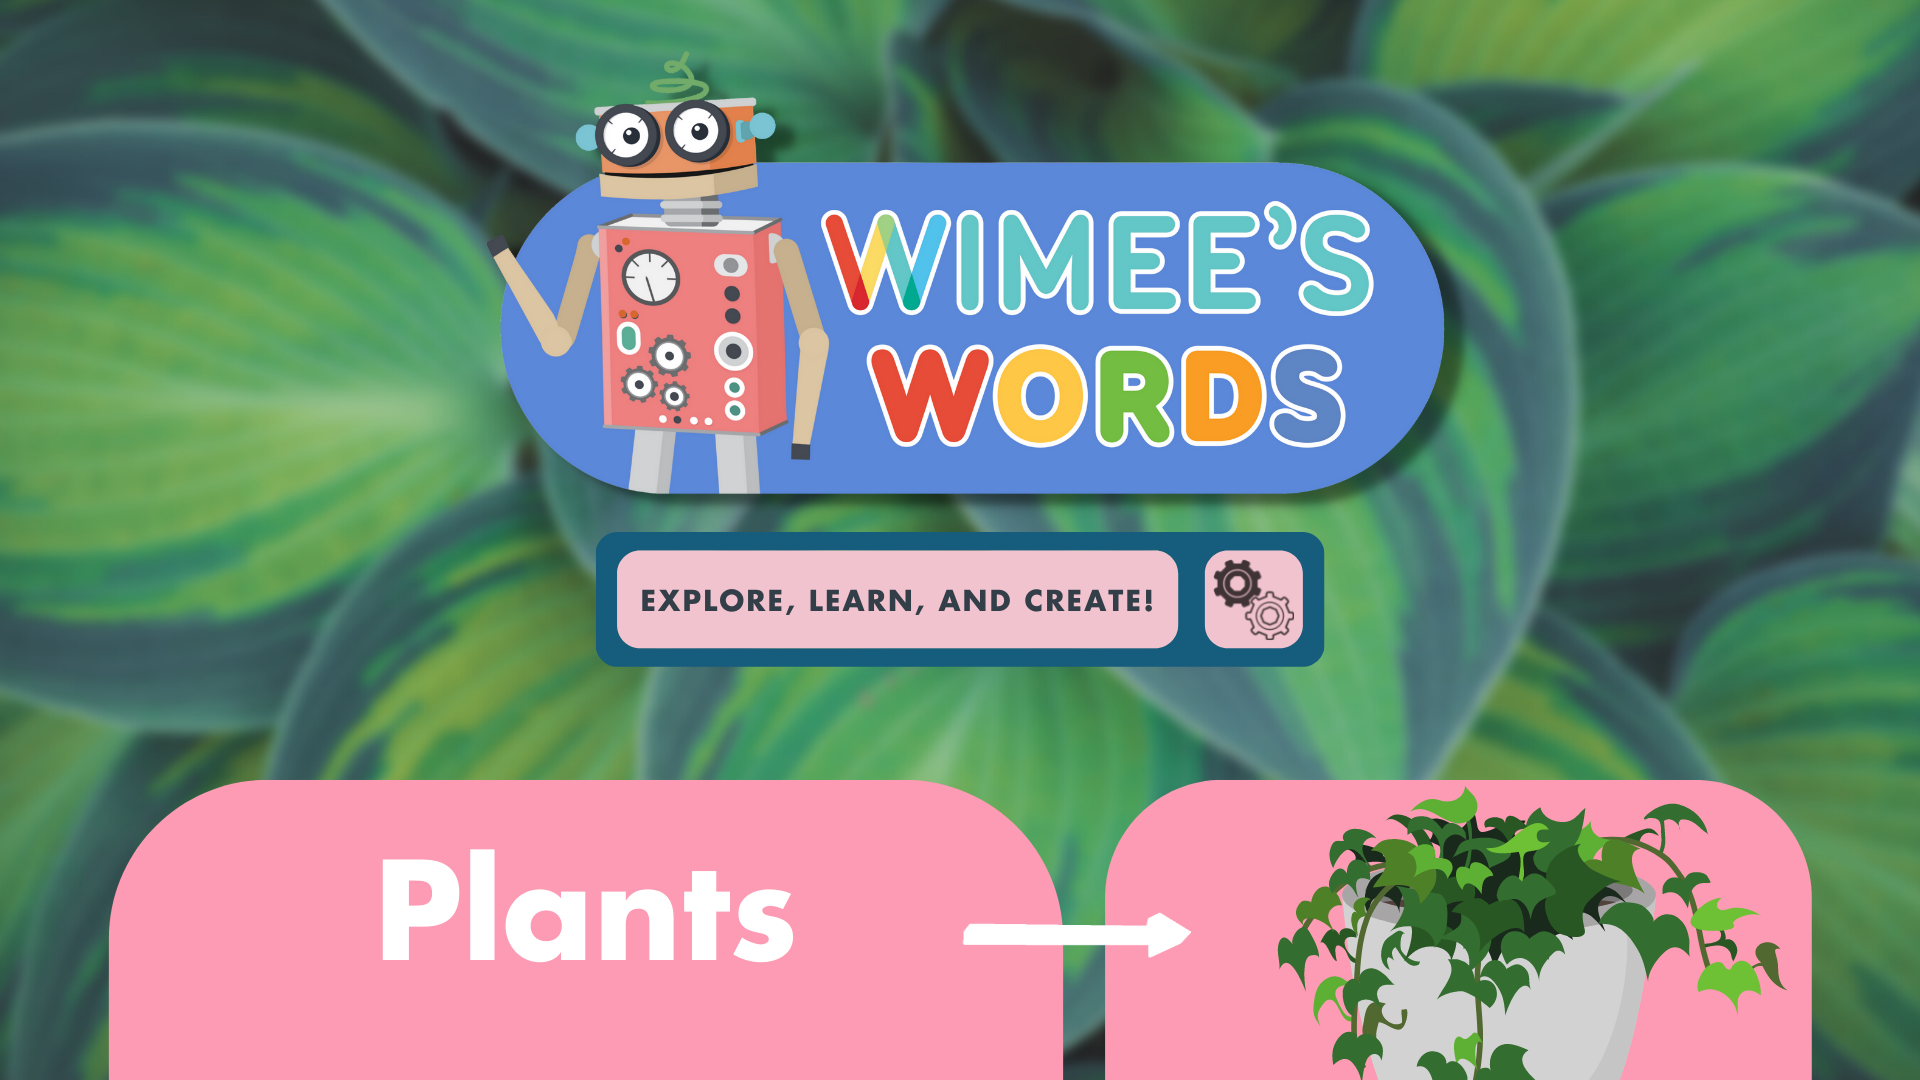 A close-ip illustration of a leafy plant. The Wimee's Words logo, the title "Plants," and a graphic of a potted plant are on the image.